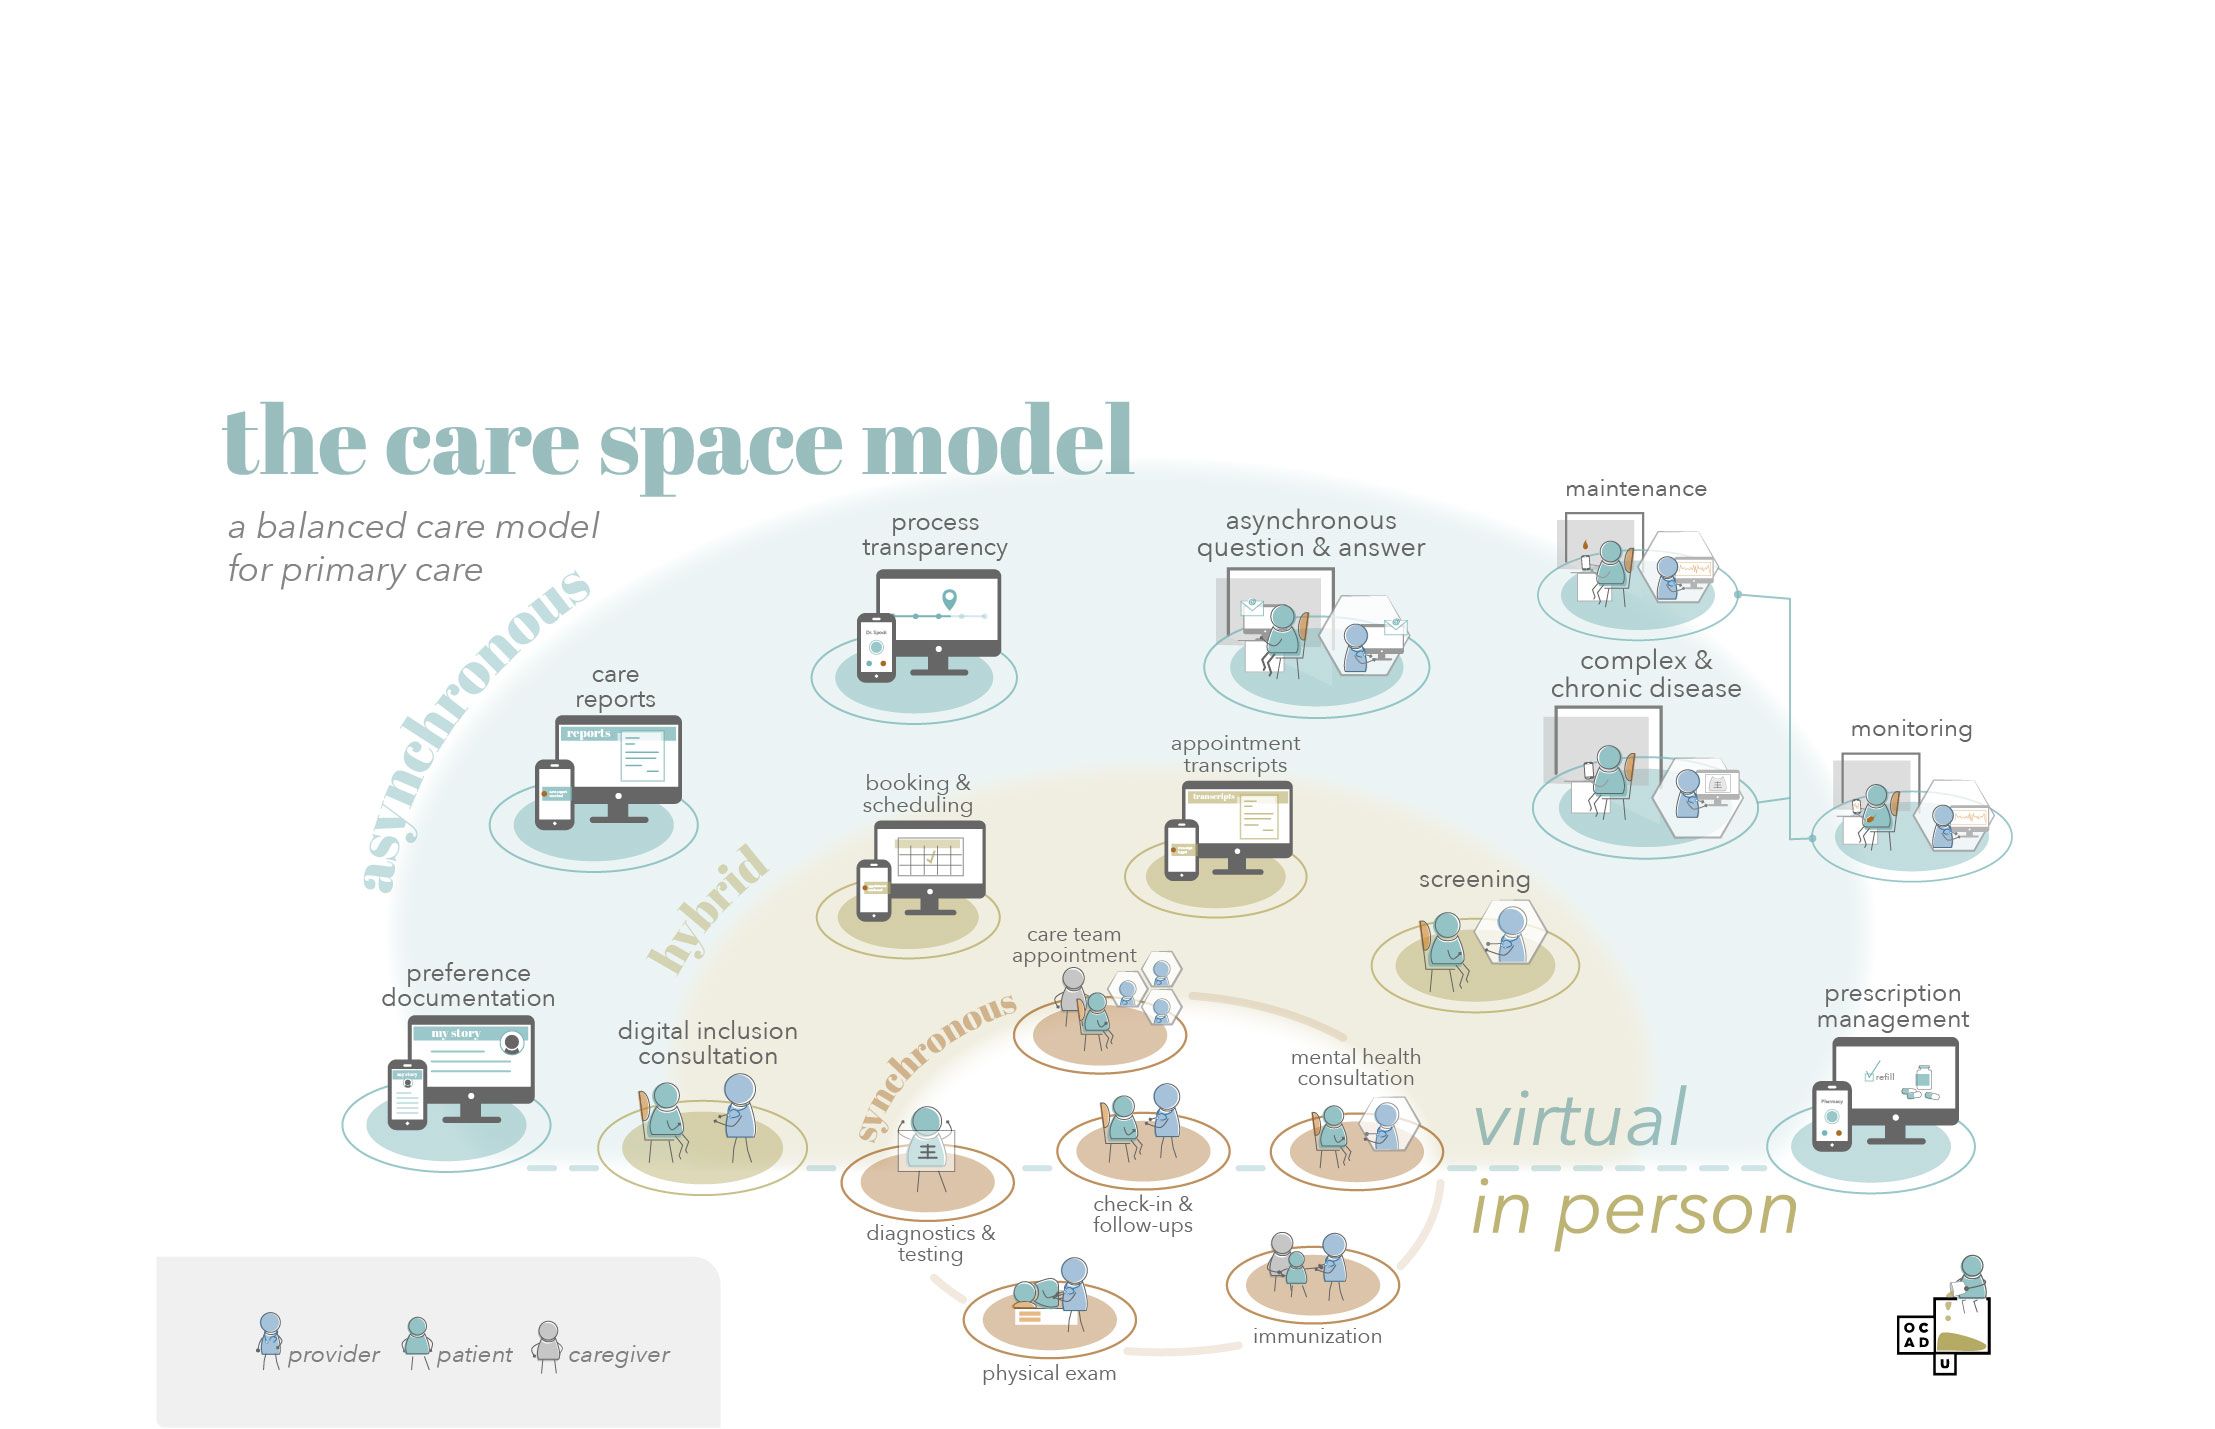 The Future of Virtual Care - Exploring The Value Of Virtual Care Through Phenomenological Research And Design Methodologies